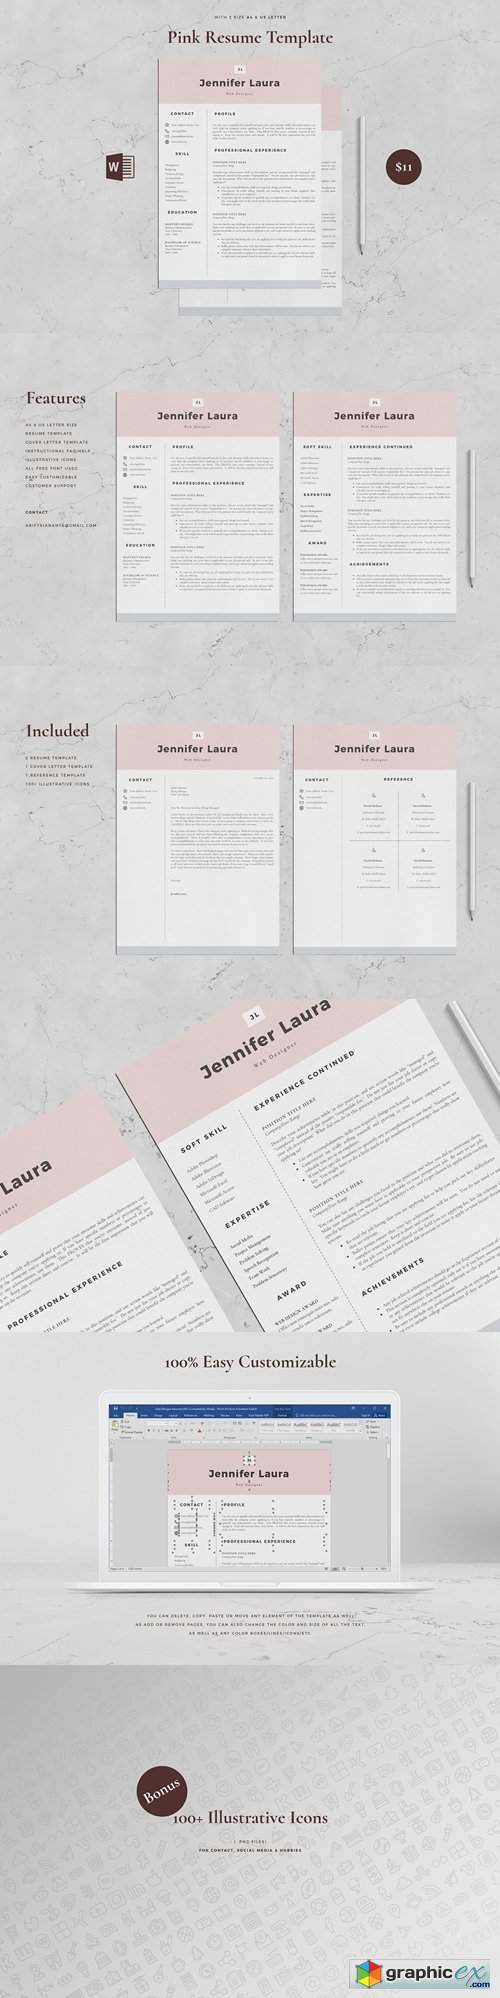 Resume Template 4 Page - Pink 3260014